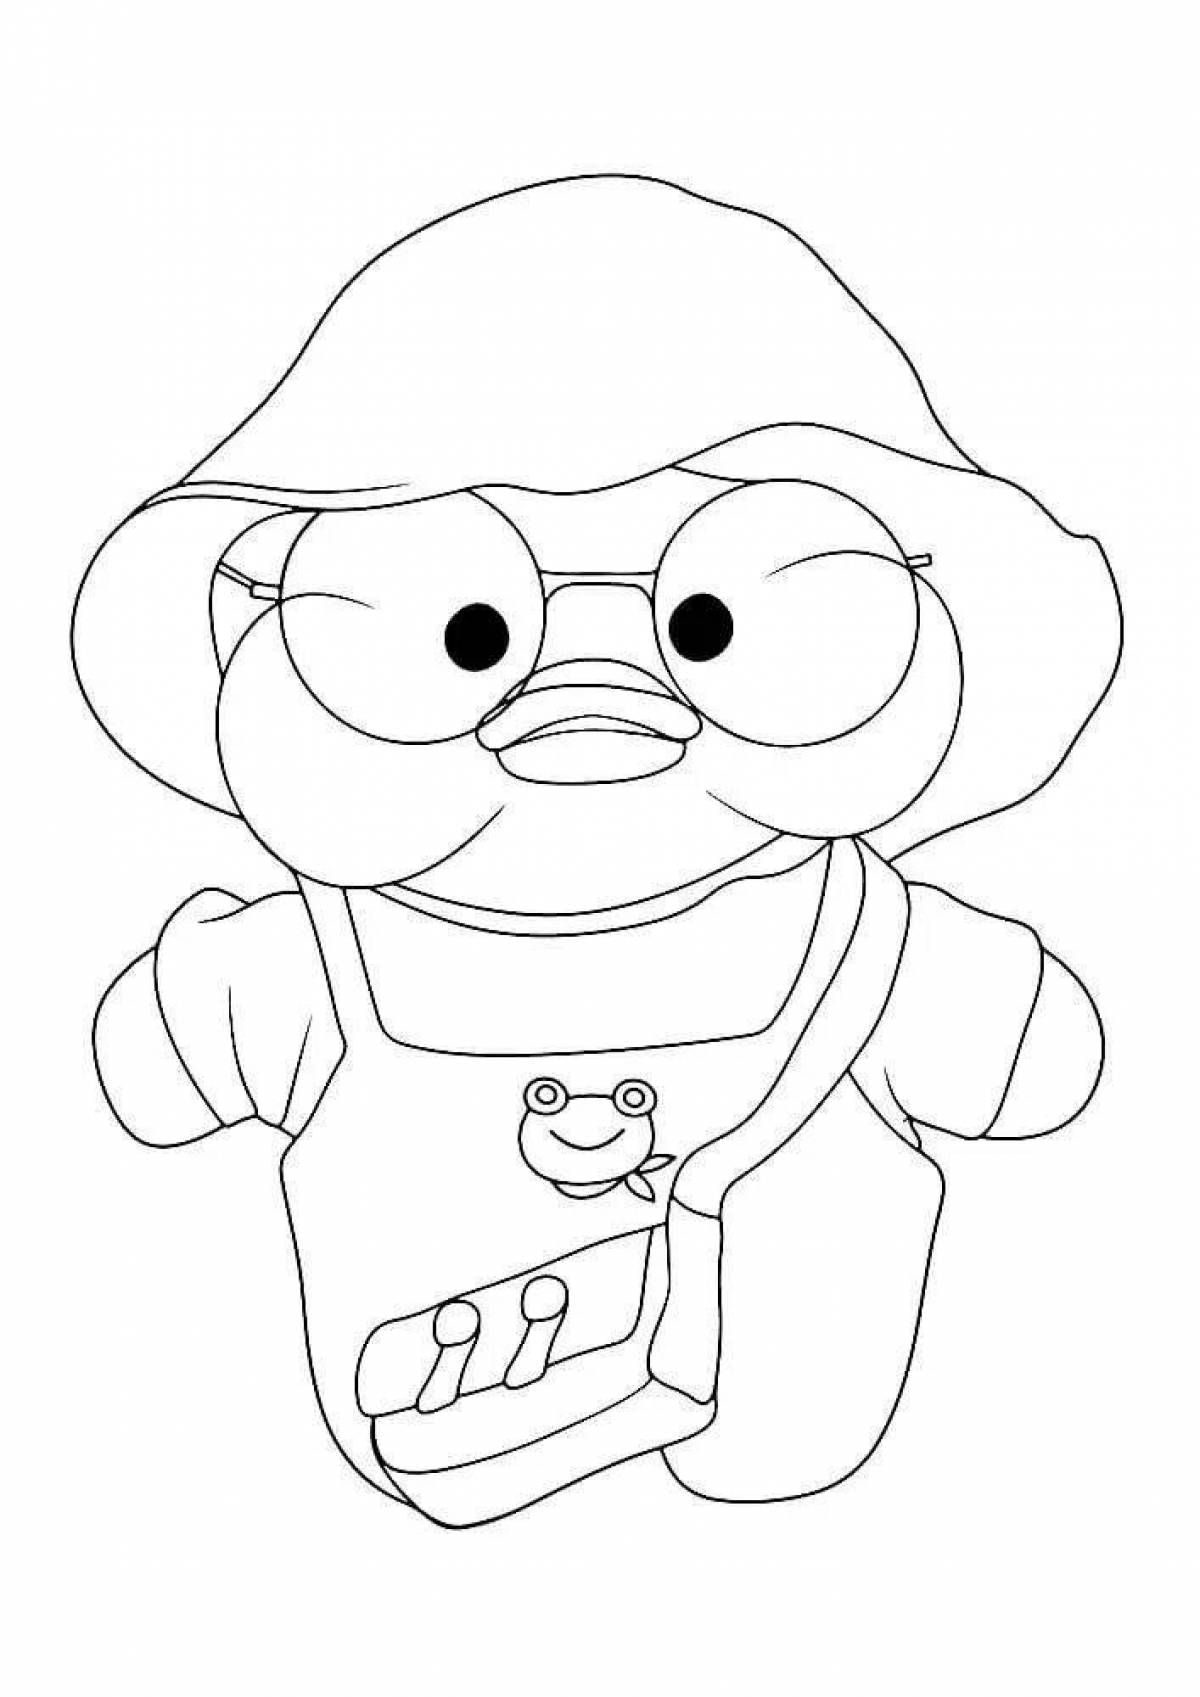 Exciting lafanfan duck coloring page